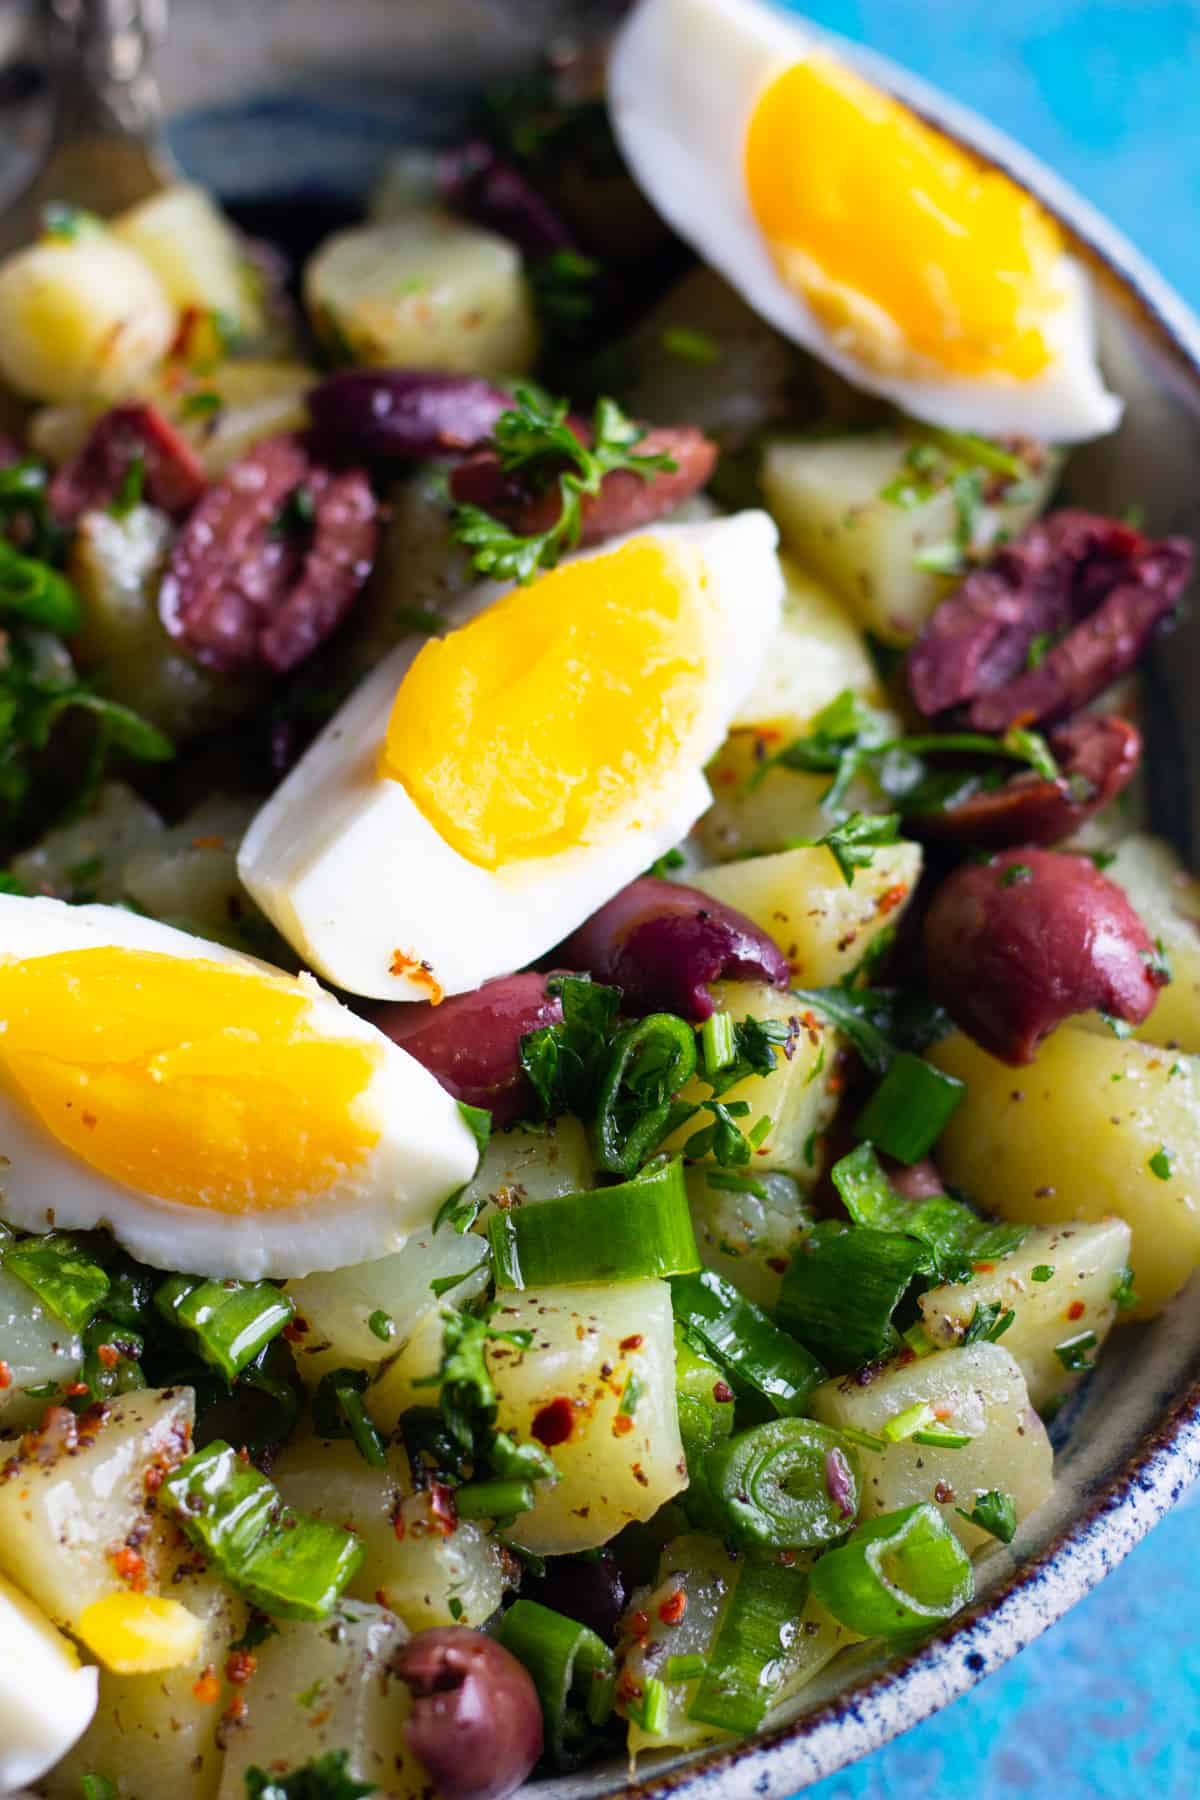 bowl of salad made with potatoes, eggs, herbs and olives